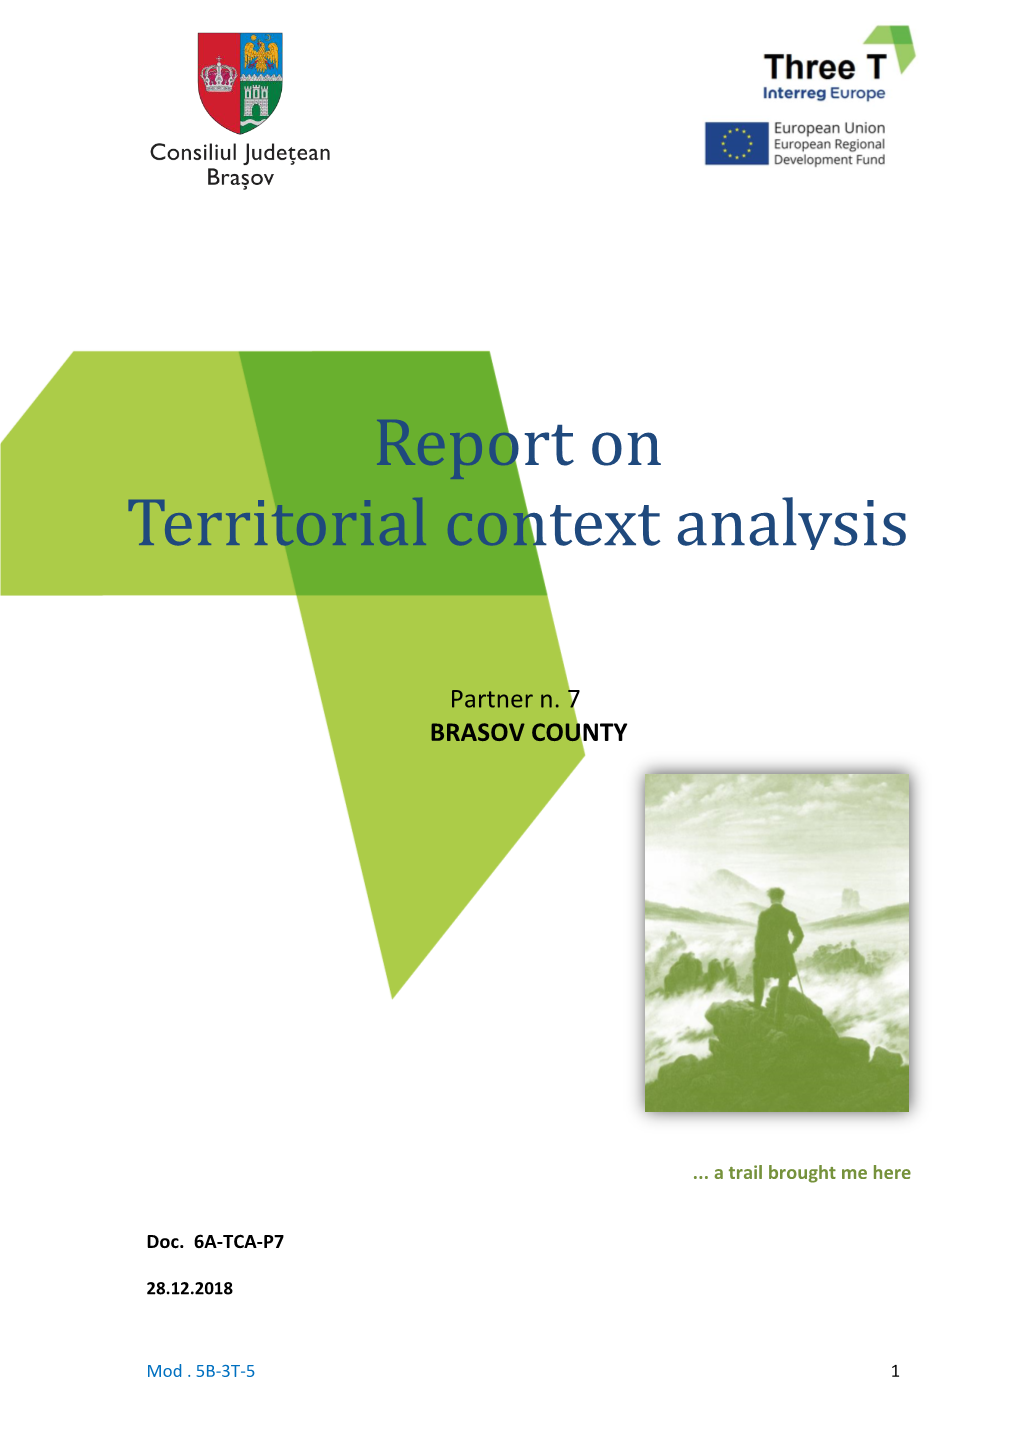 Report on Territorial Context Analysis